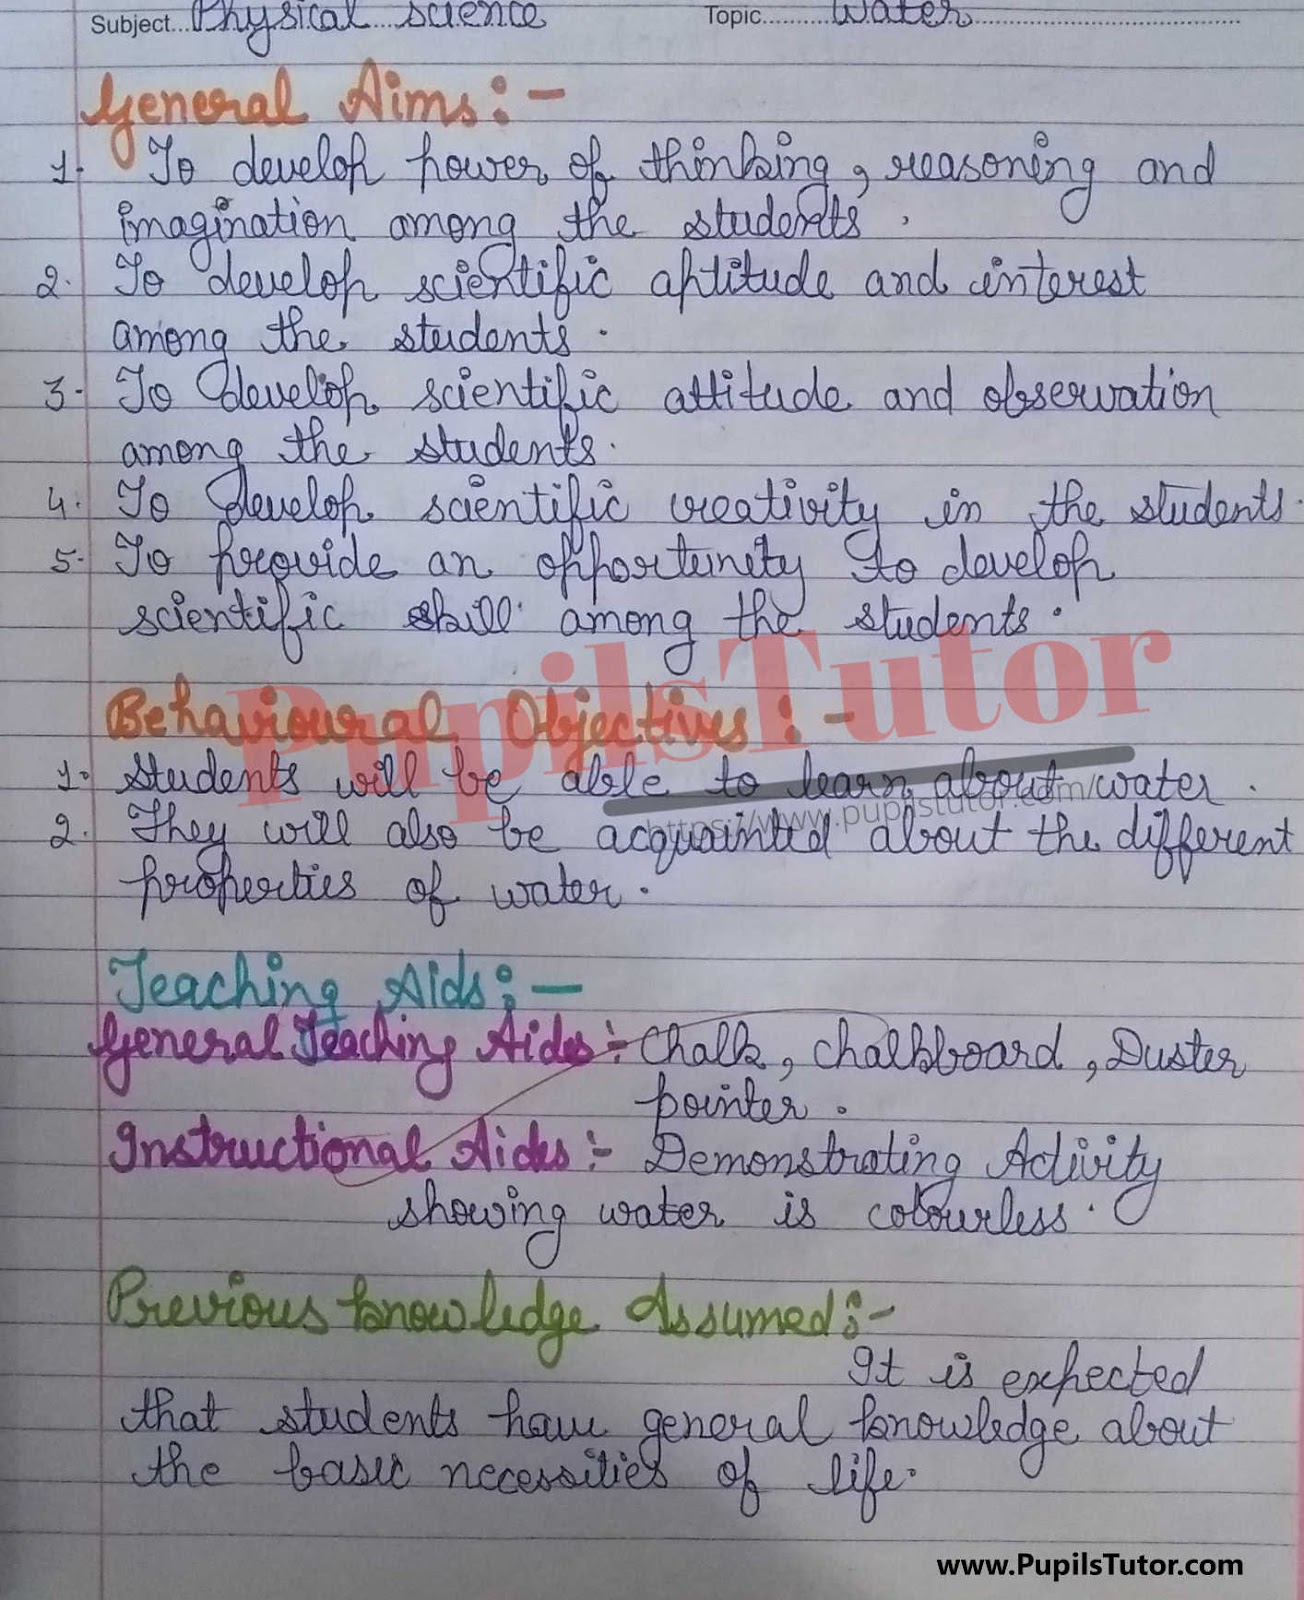 Properties And Molecular Structure Of Water Lesson Plan – (Page And Image Number 1) – Pupils Tutor